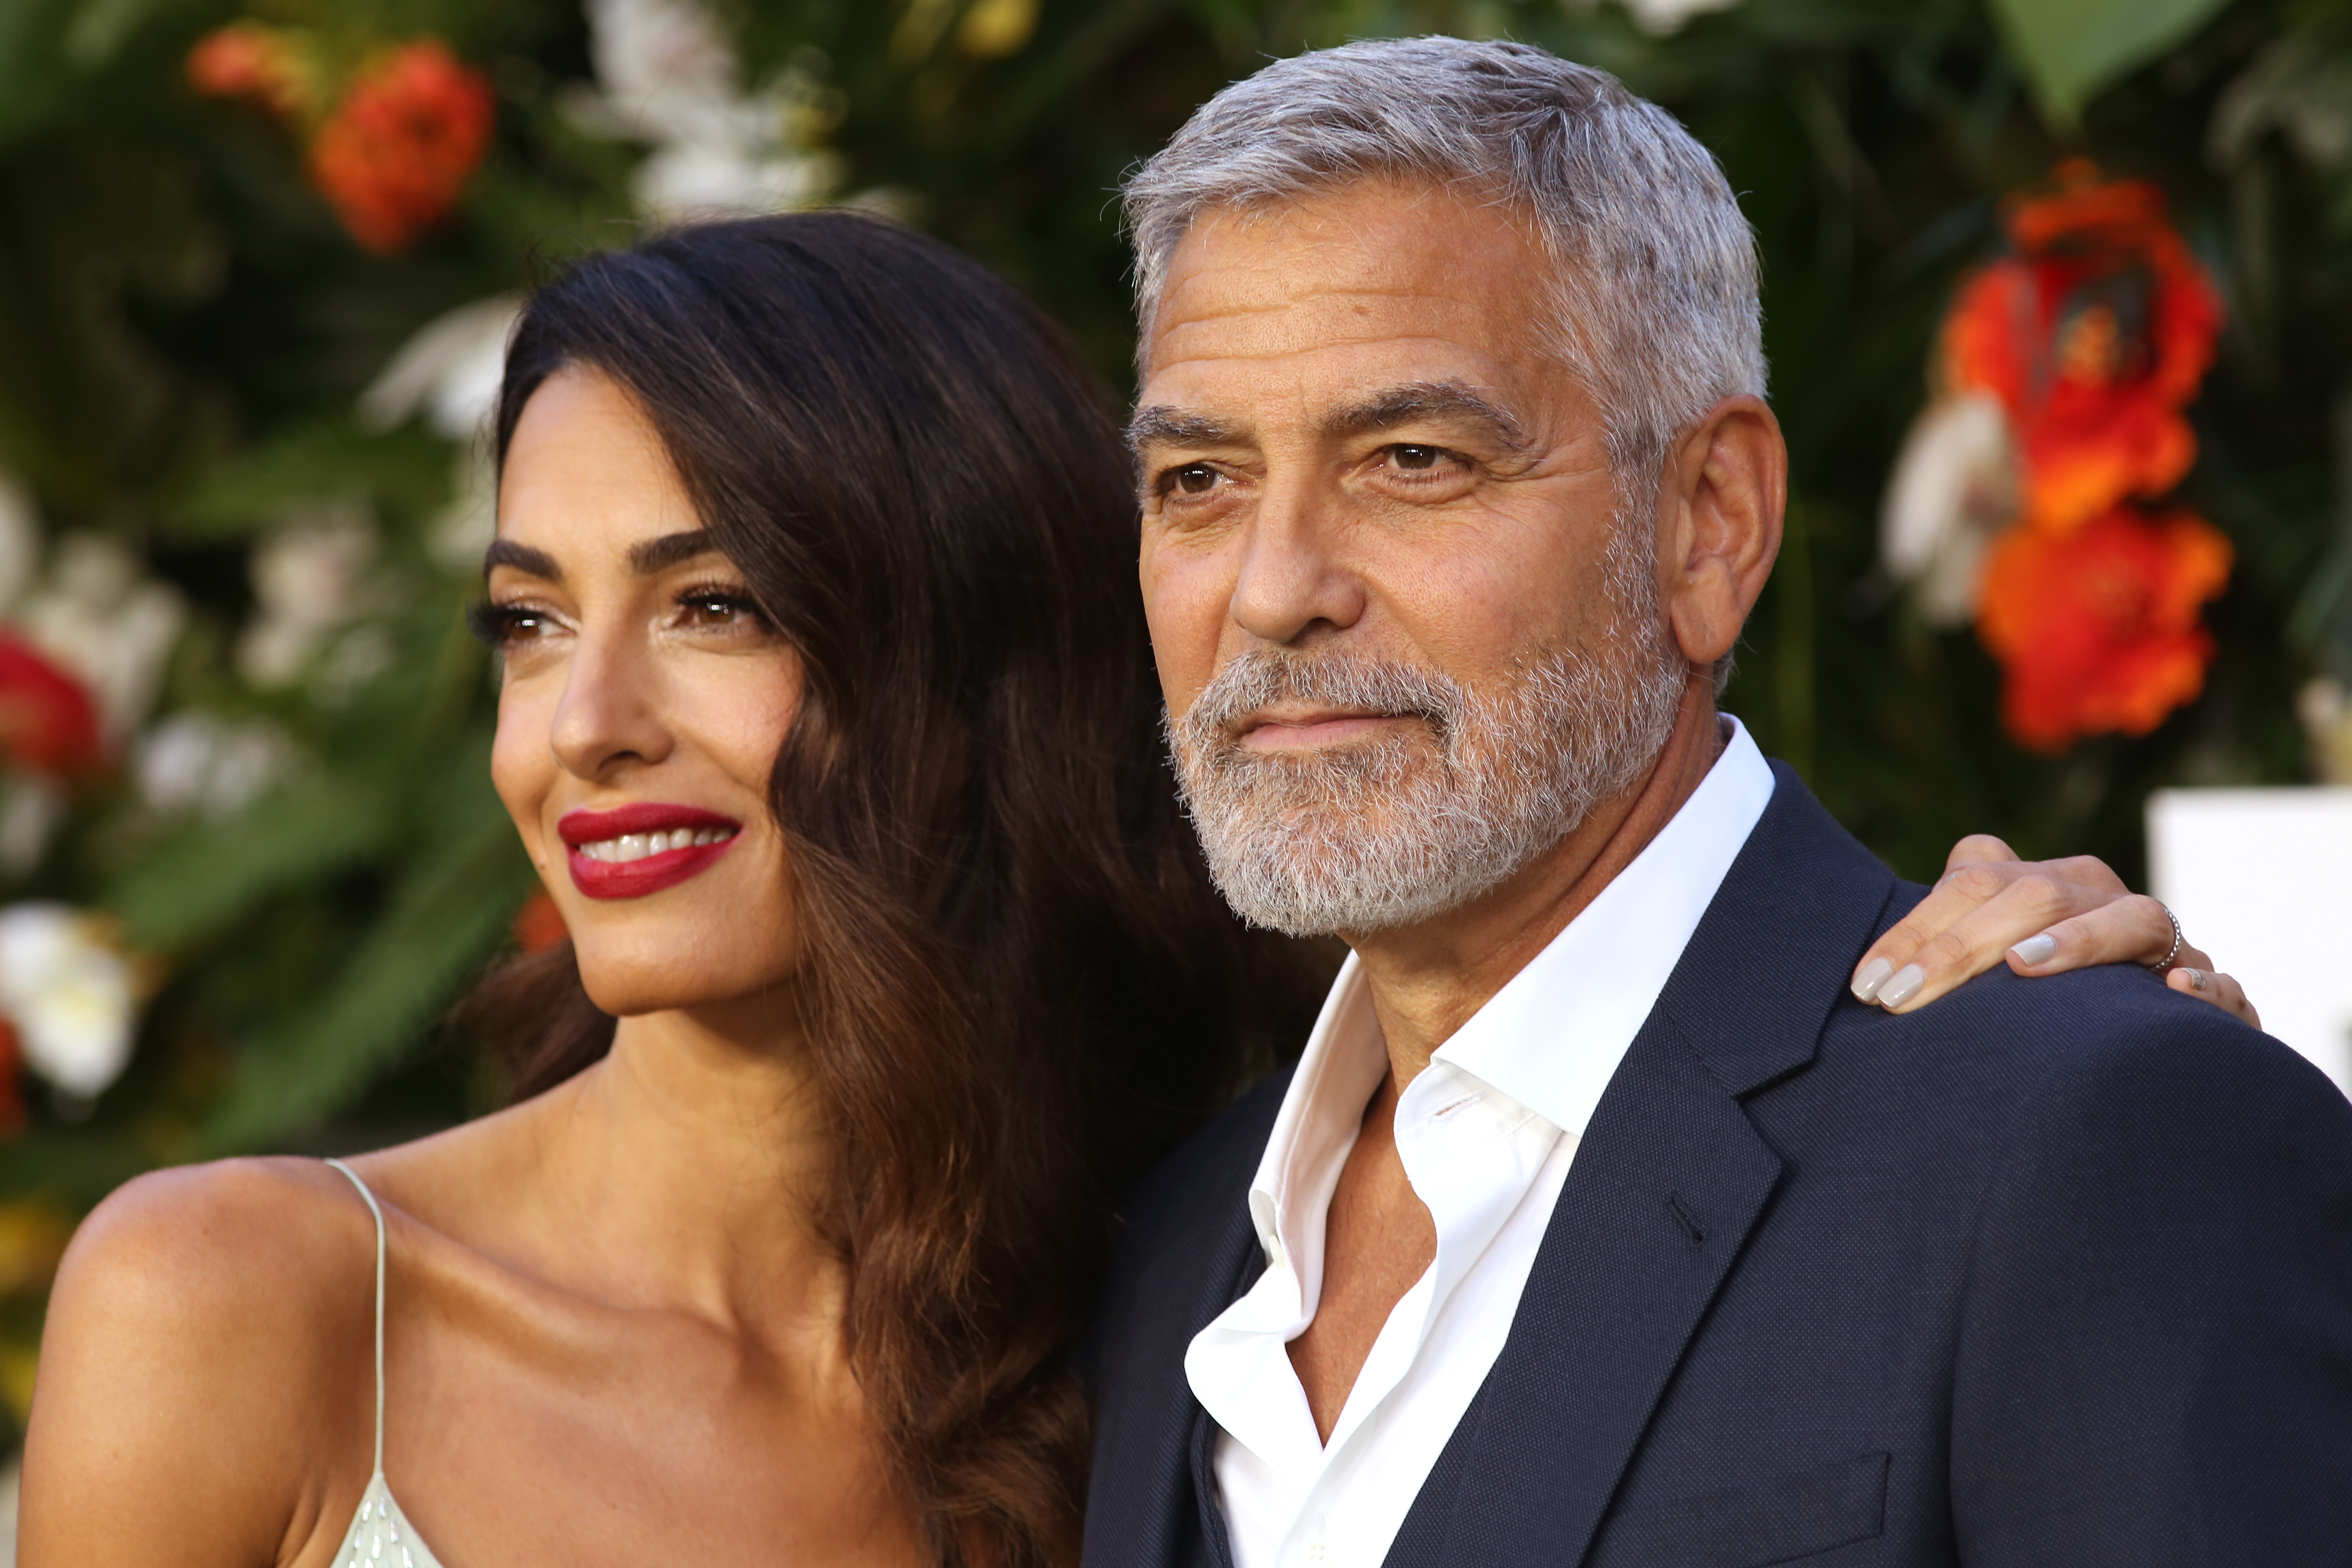 George Clooney and Amal Clooney on September 07, 2022 in London, England. | Source: Getty Images